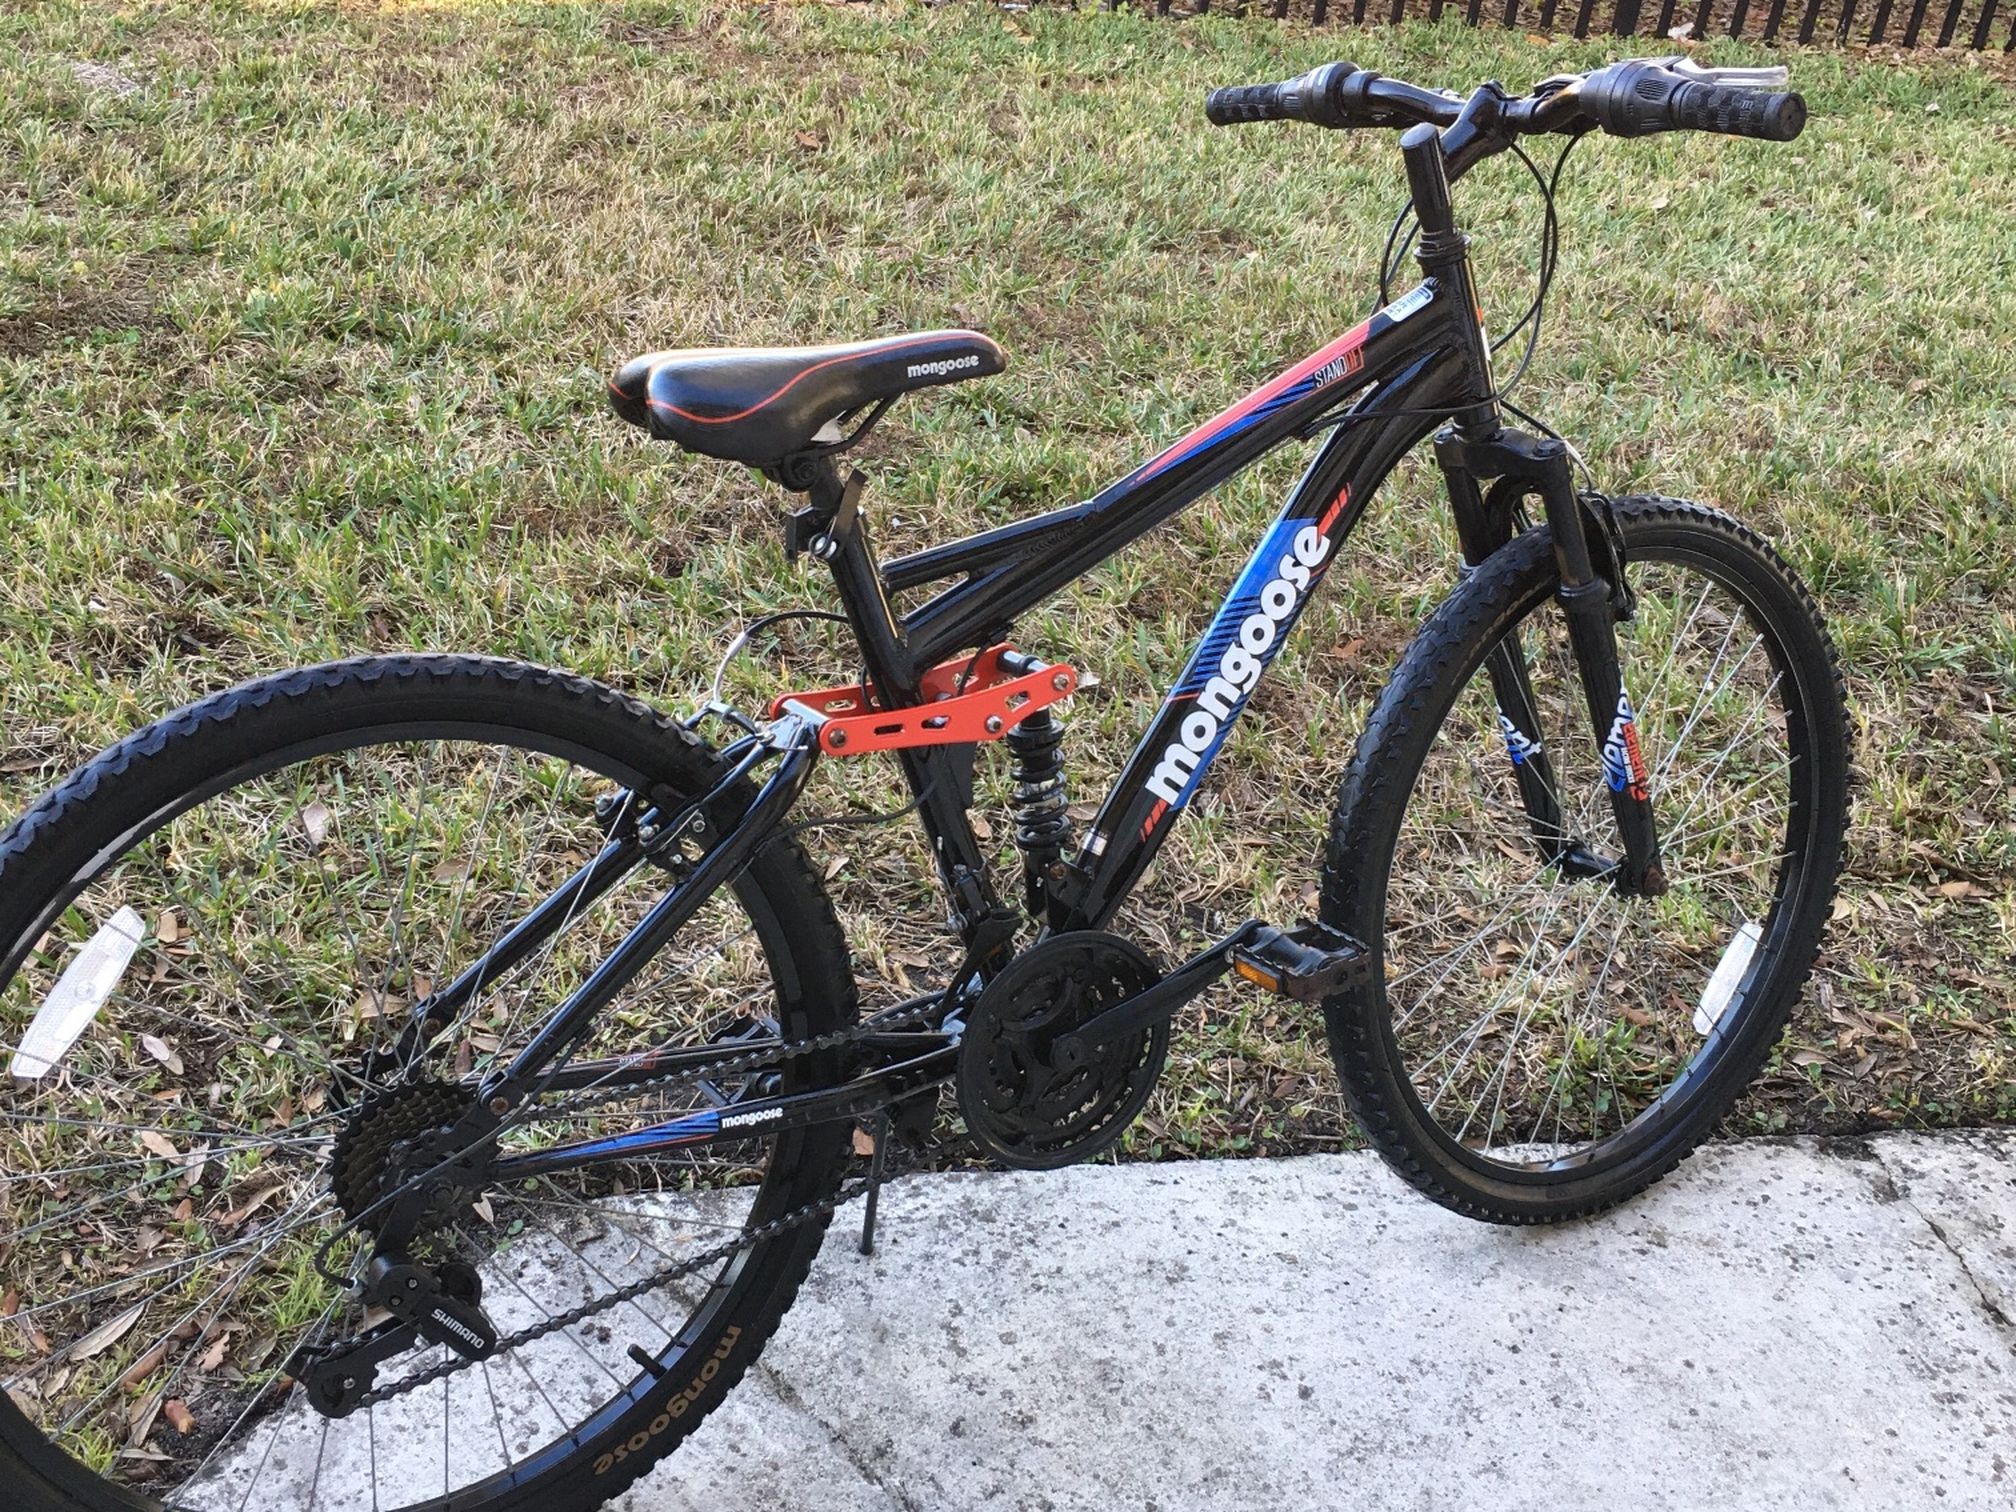 Mongoose Men's Standoff 26" Mountain Bike “With Light Included”, Full suspension frame. $160 OBO.